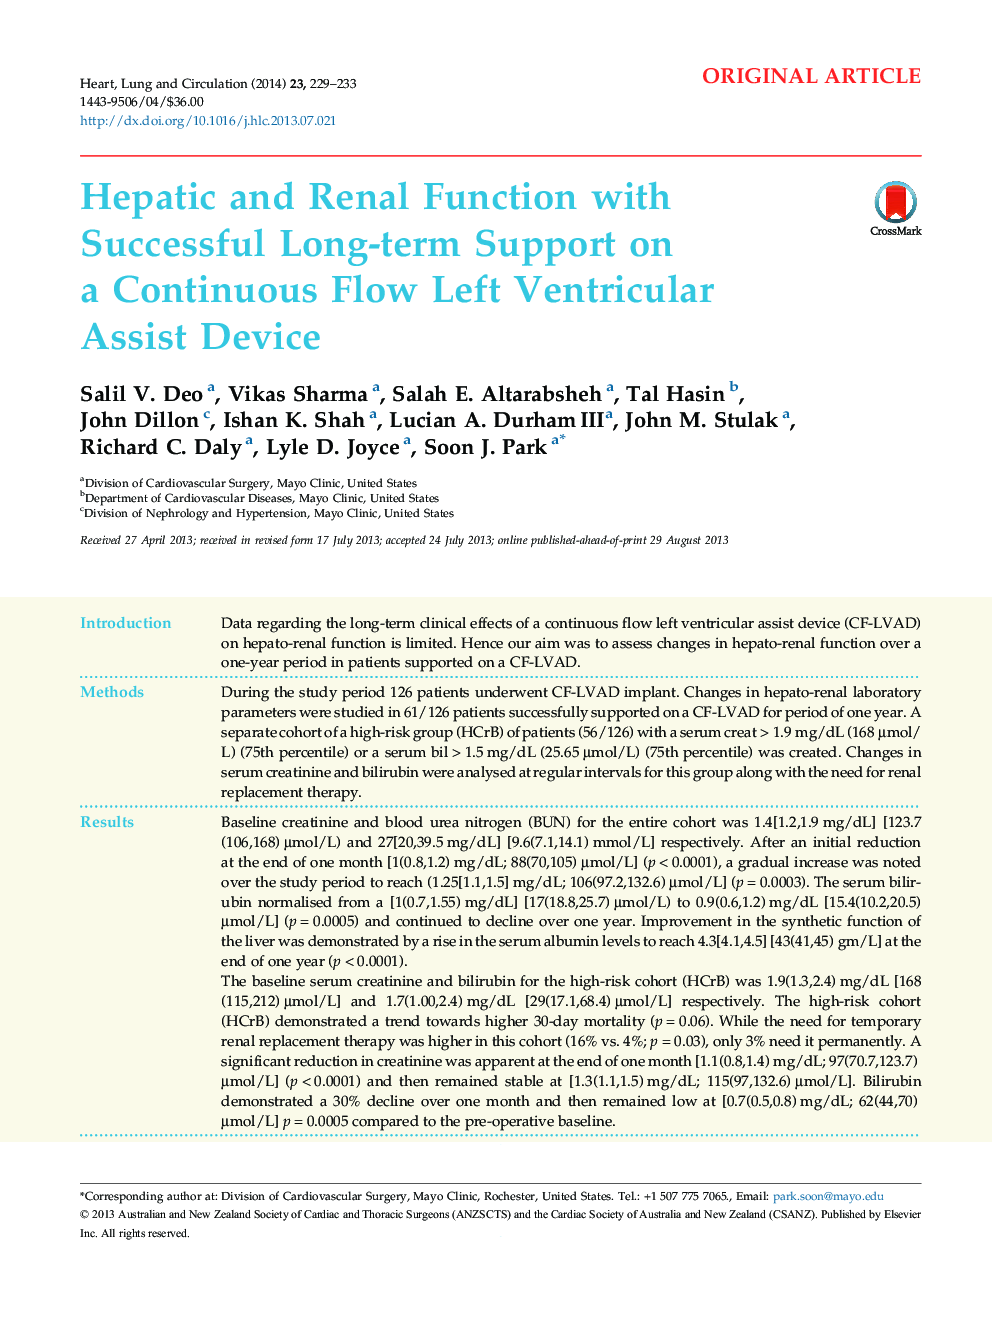 Hepatic and Renal Function with Successful Long-term Support on a Continuous Flow Left Ventricular Assist Device